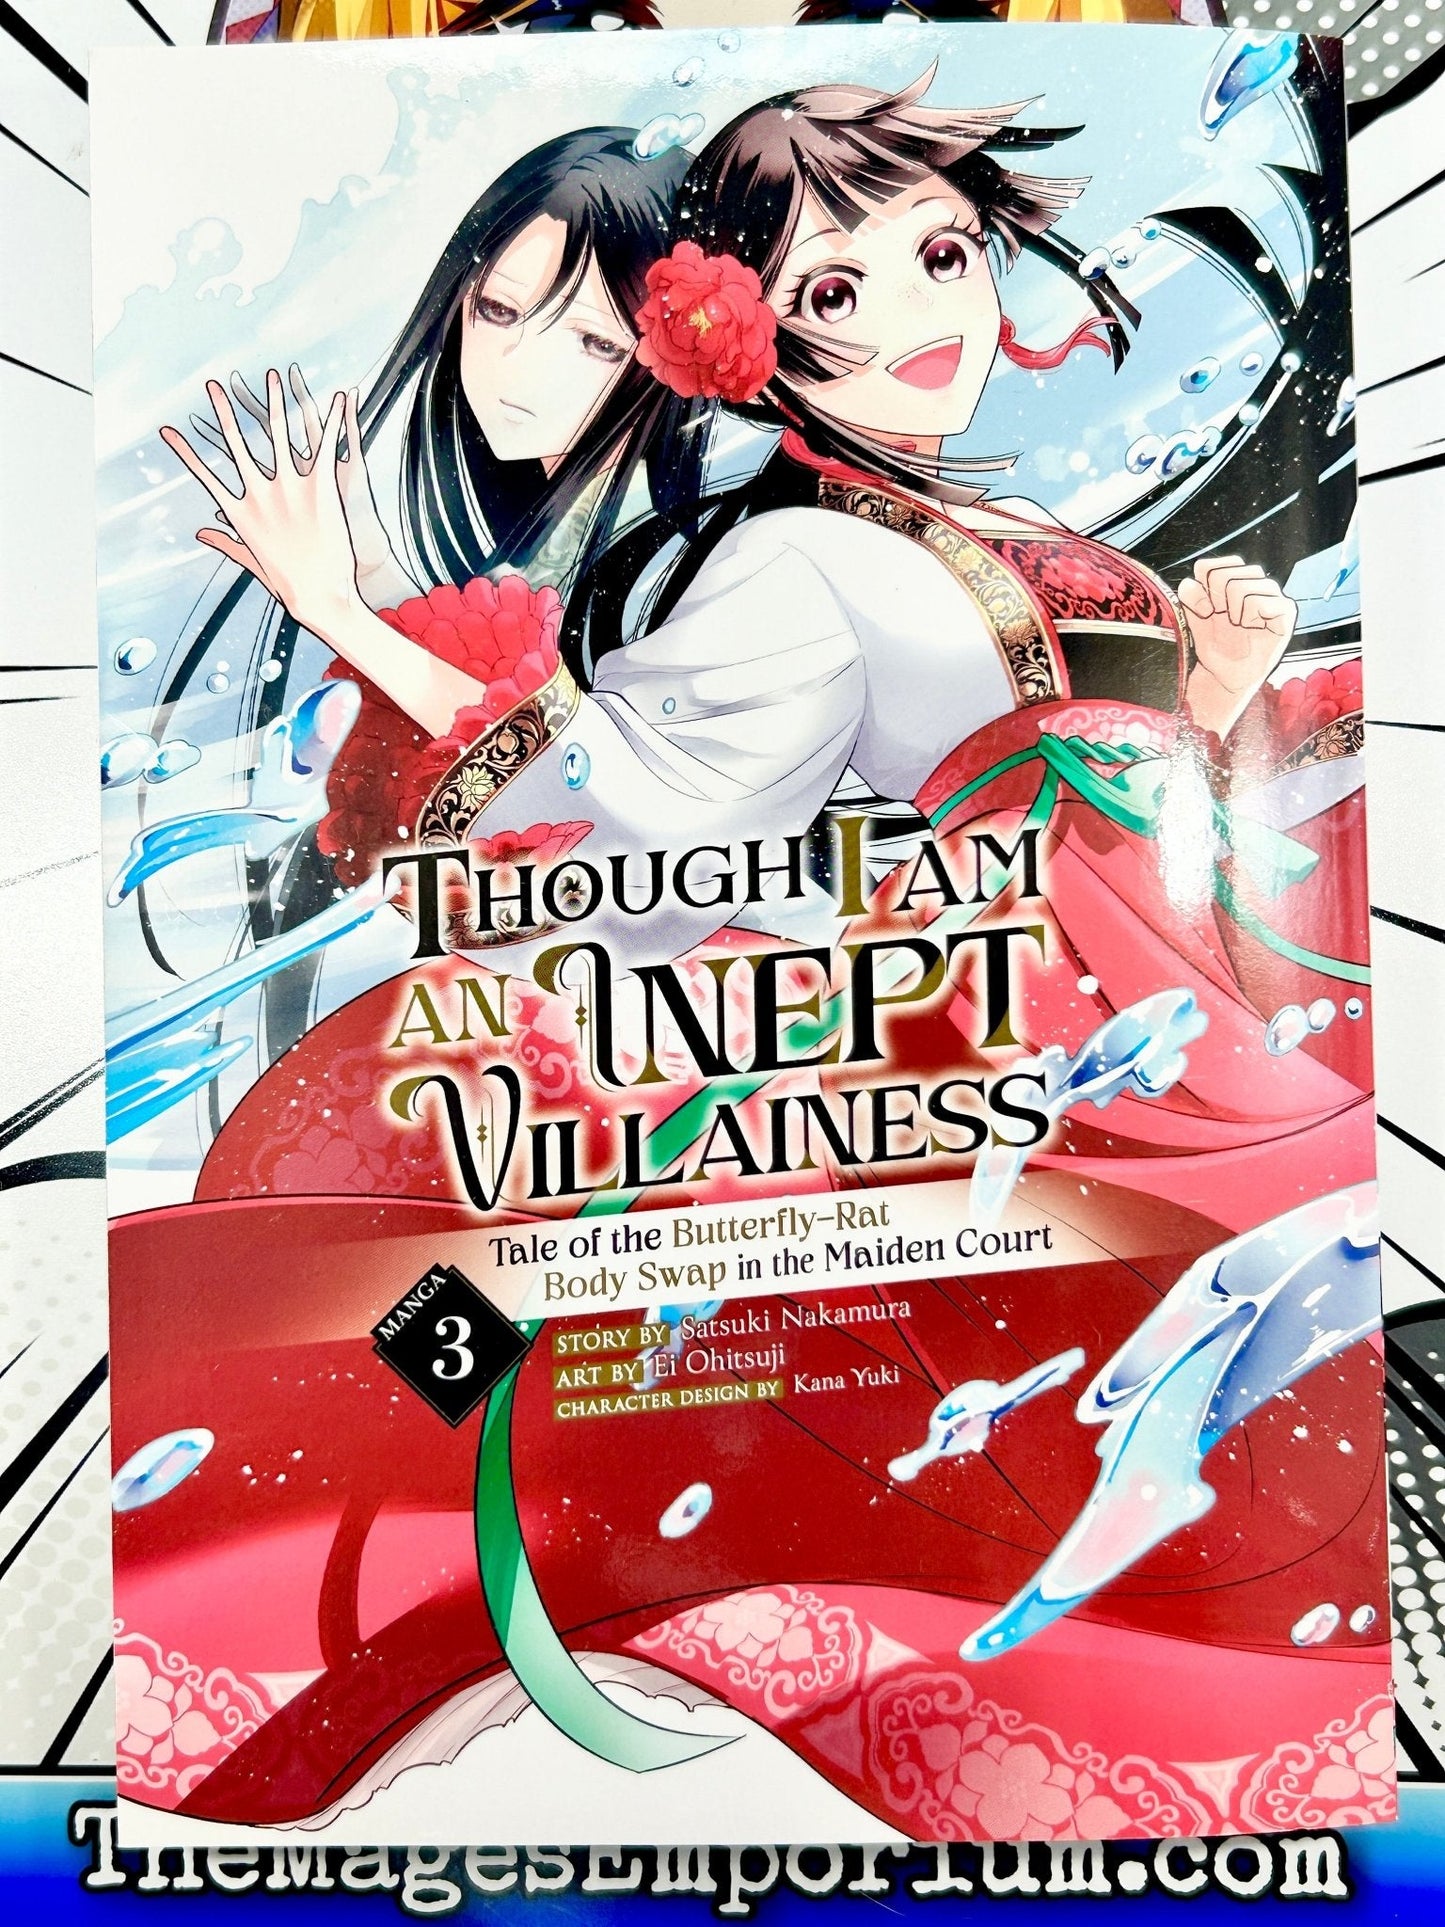 Though I Am An Inept Villainess Tale of the Butterfly-Rat Body Swap in the Maiden Court Vol 3 Manga